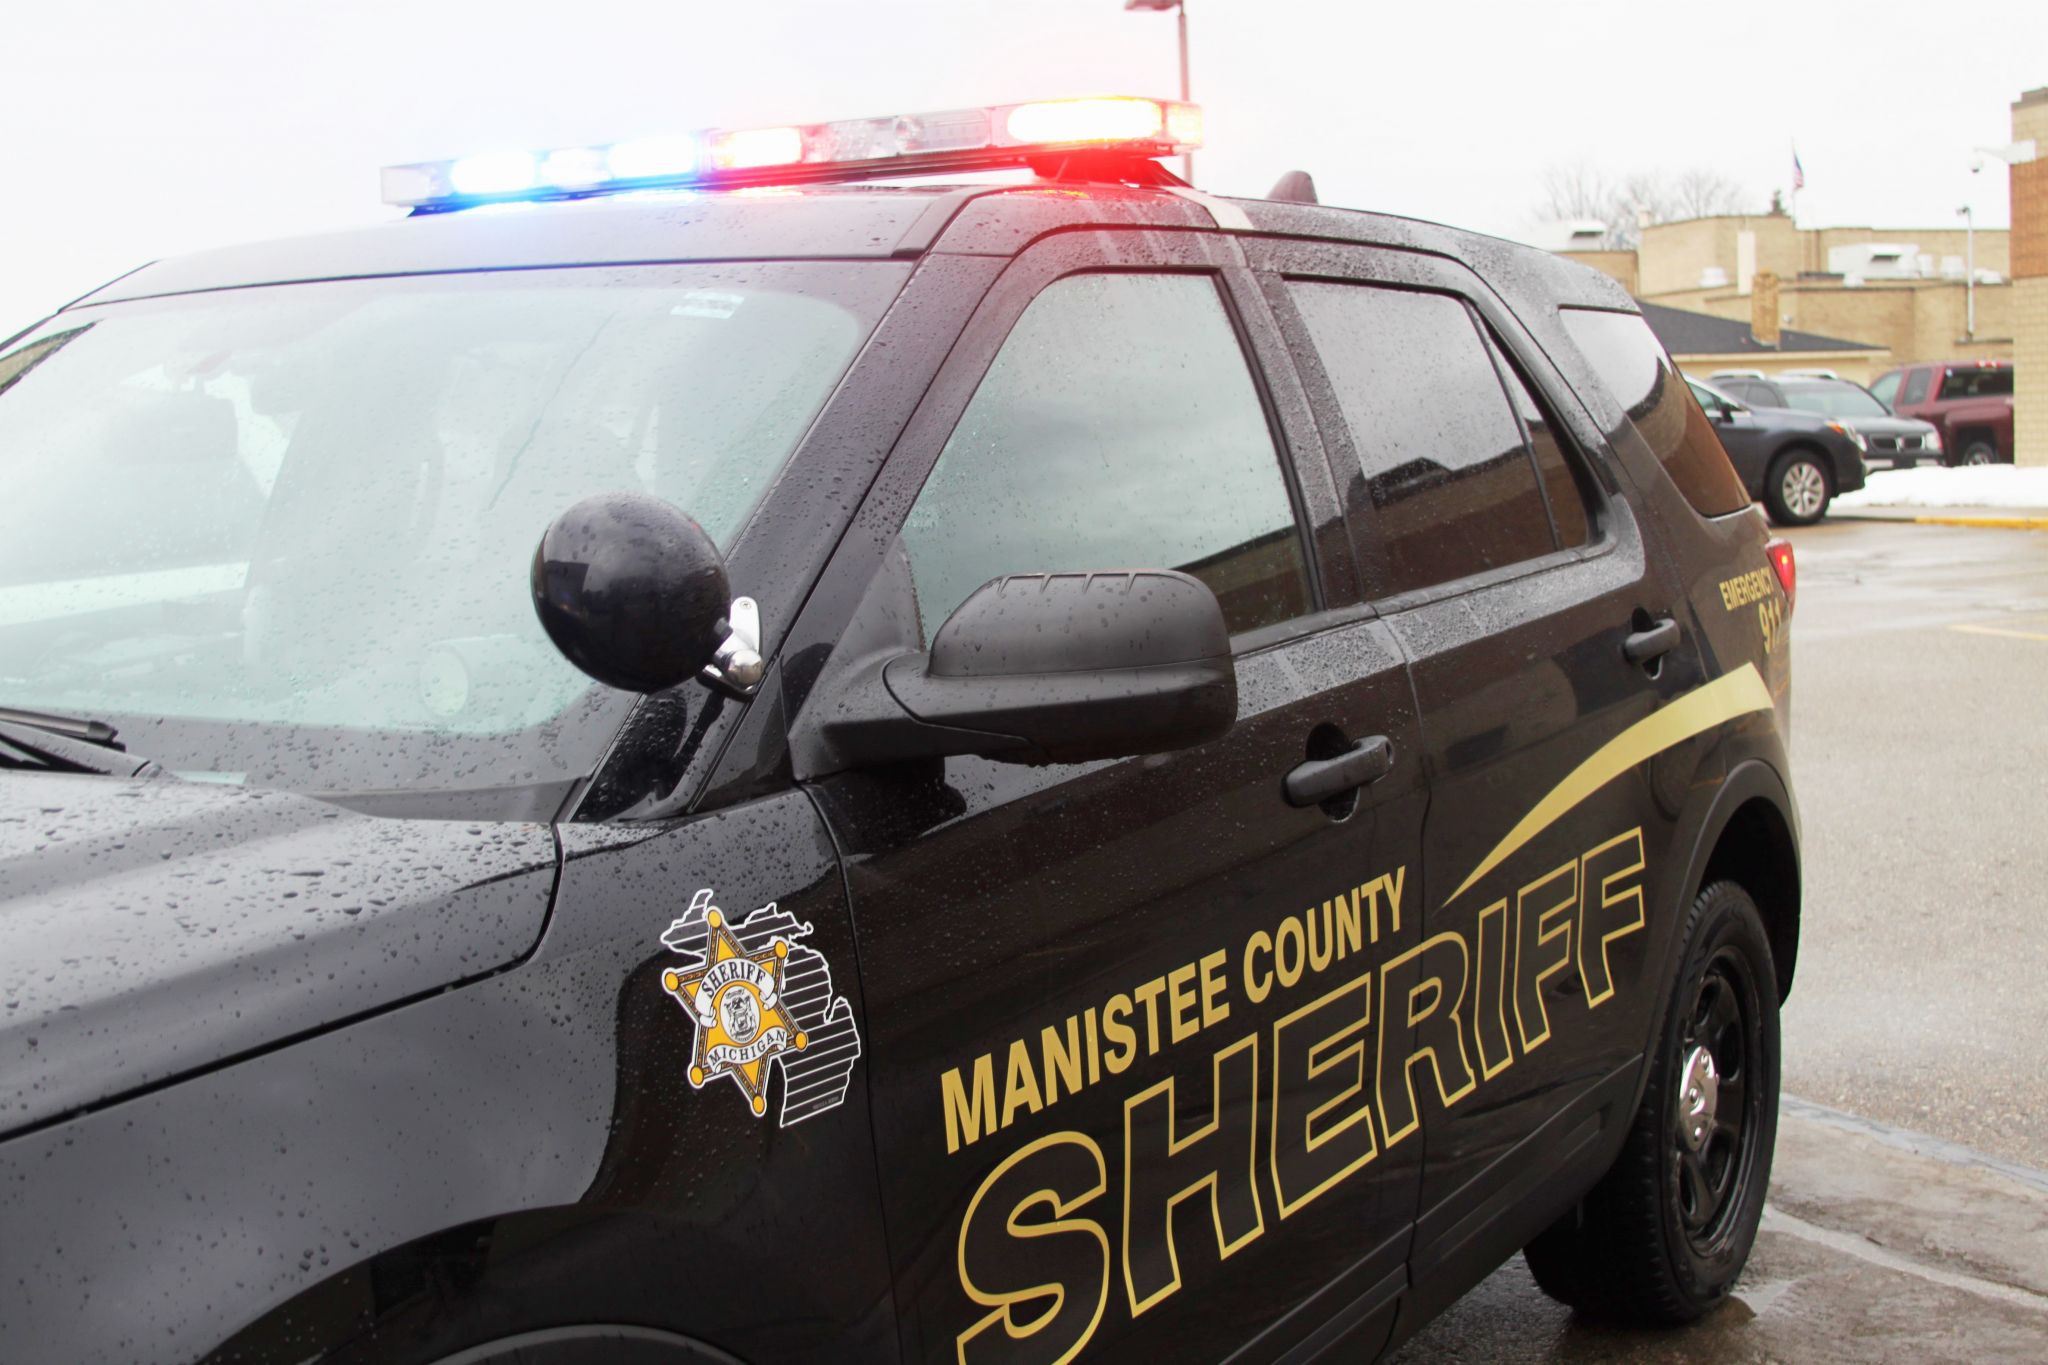 Vehicle reported stolen in latest Manistee County blotter - Manistee News Advocate